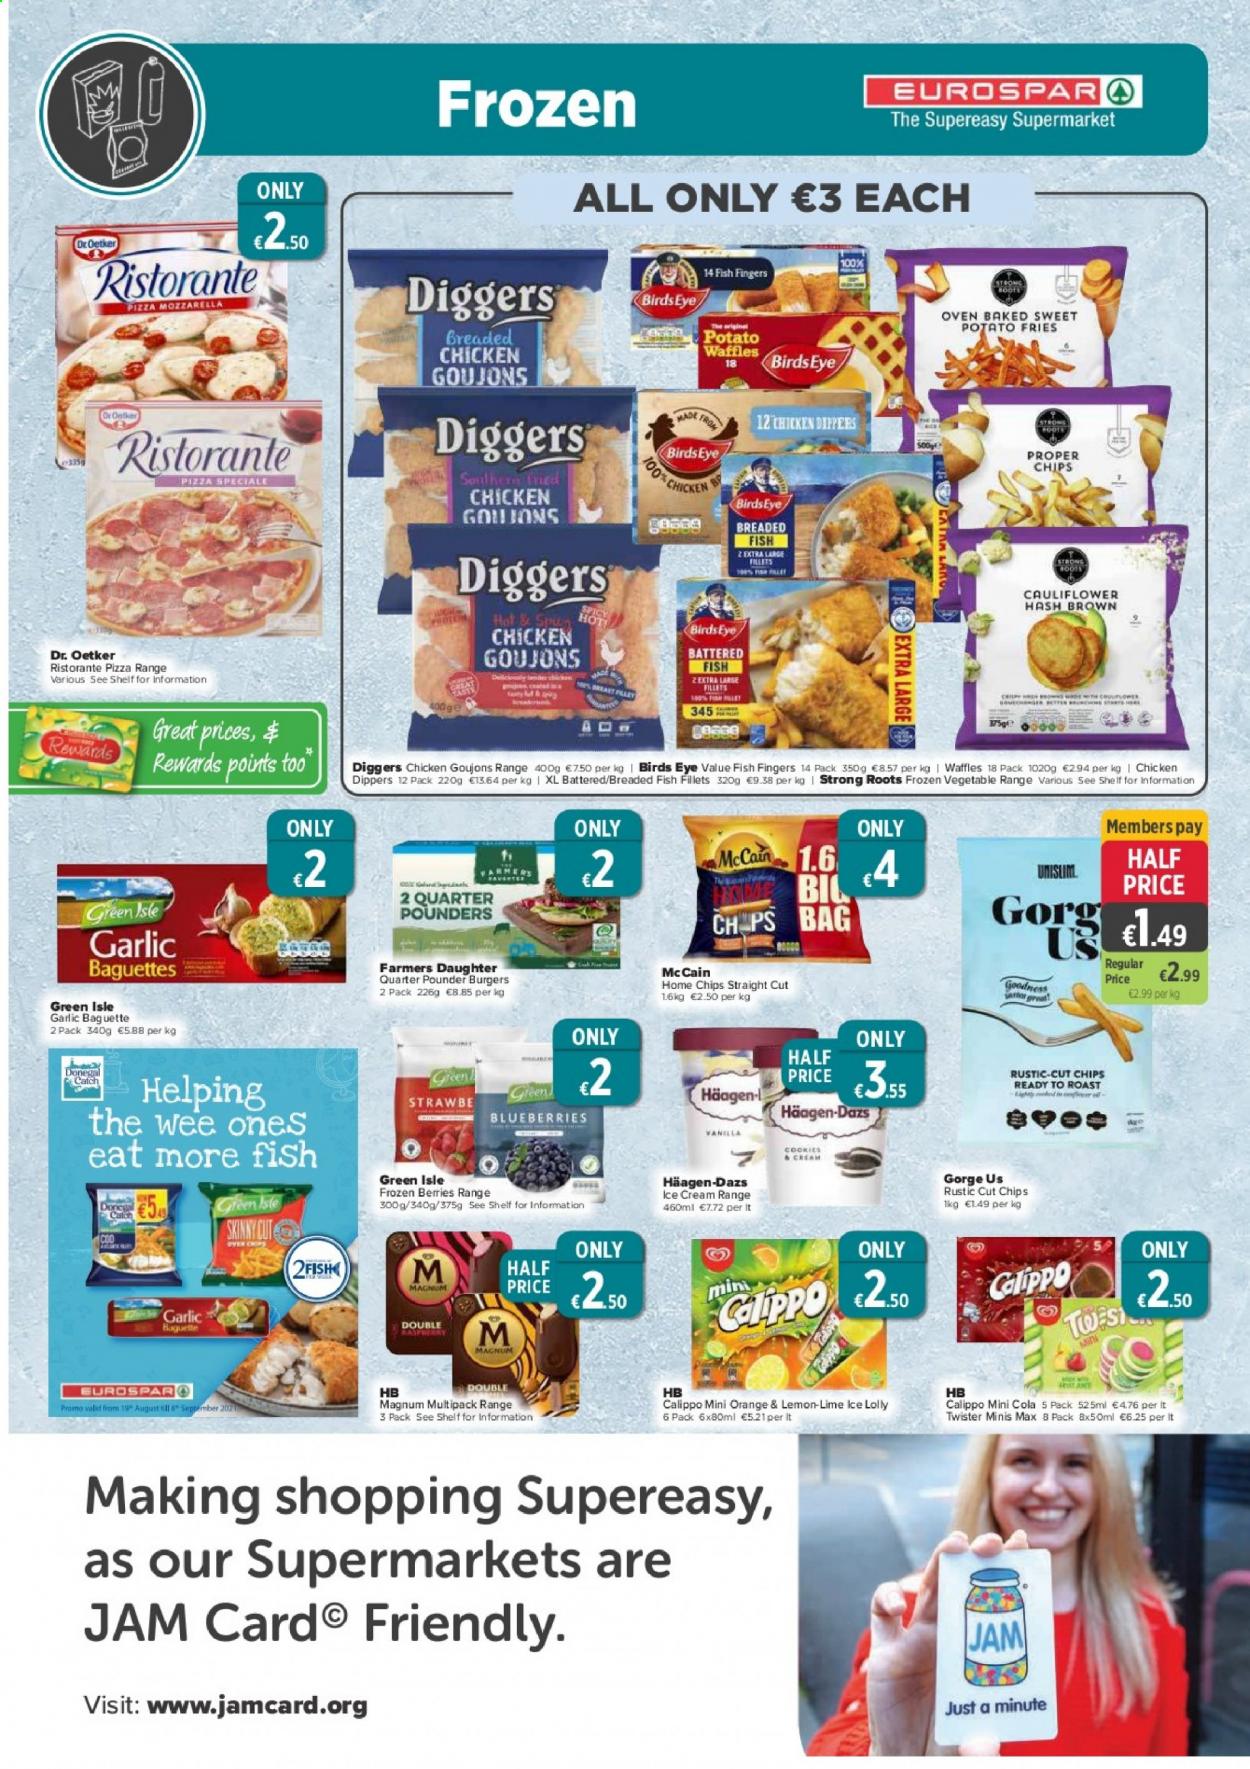 thumbnail - EUROSPAR offer  - 19.08.2021 - 08.09.2021 - Sales products - baguette, waffles, garlic, sweet potato, blueberries, oranges, fish fillets, fish, fish fingers, fish sticks, pizza, hamburger, fried chicken, Bird's Eye, breaded fish, Dr. Oetker, ice cream, Häagen-Dazs, Calippo, frozen berries, chicken dippers, Donegal Catch, McCain, frozen chips, sweet potato fries, cookies, lollipop, fruit jam. Page 4.